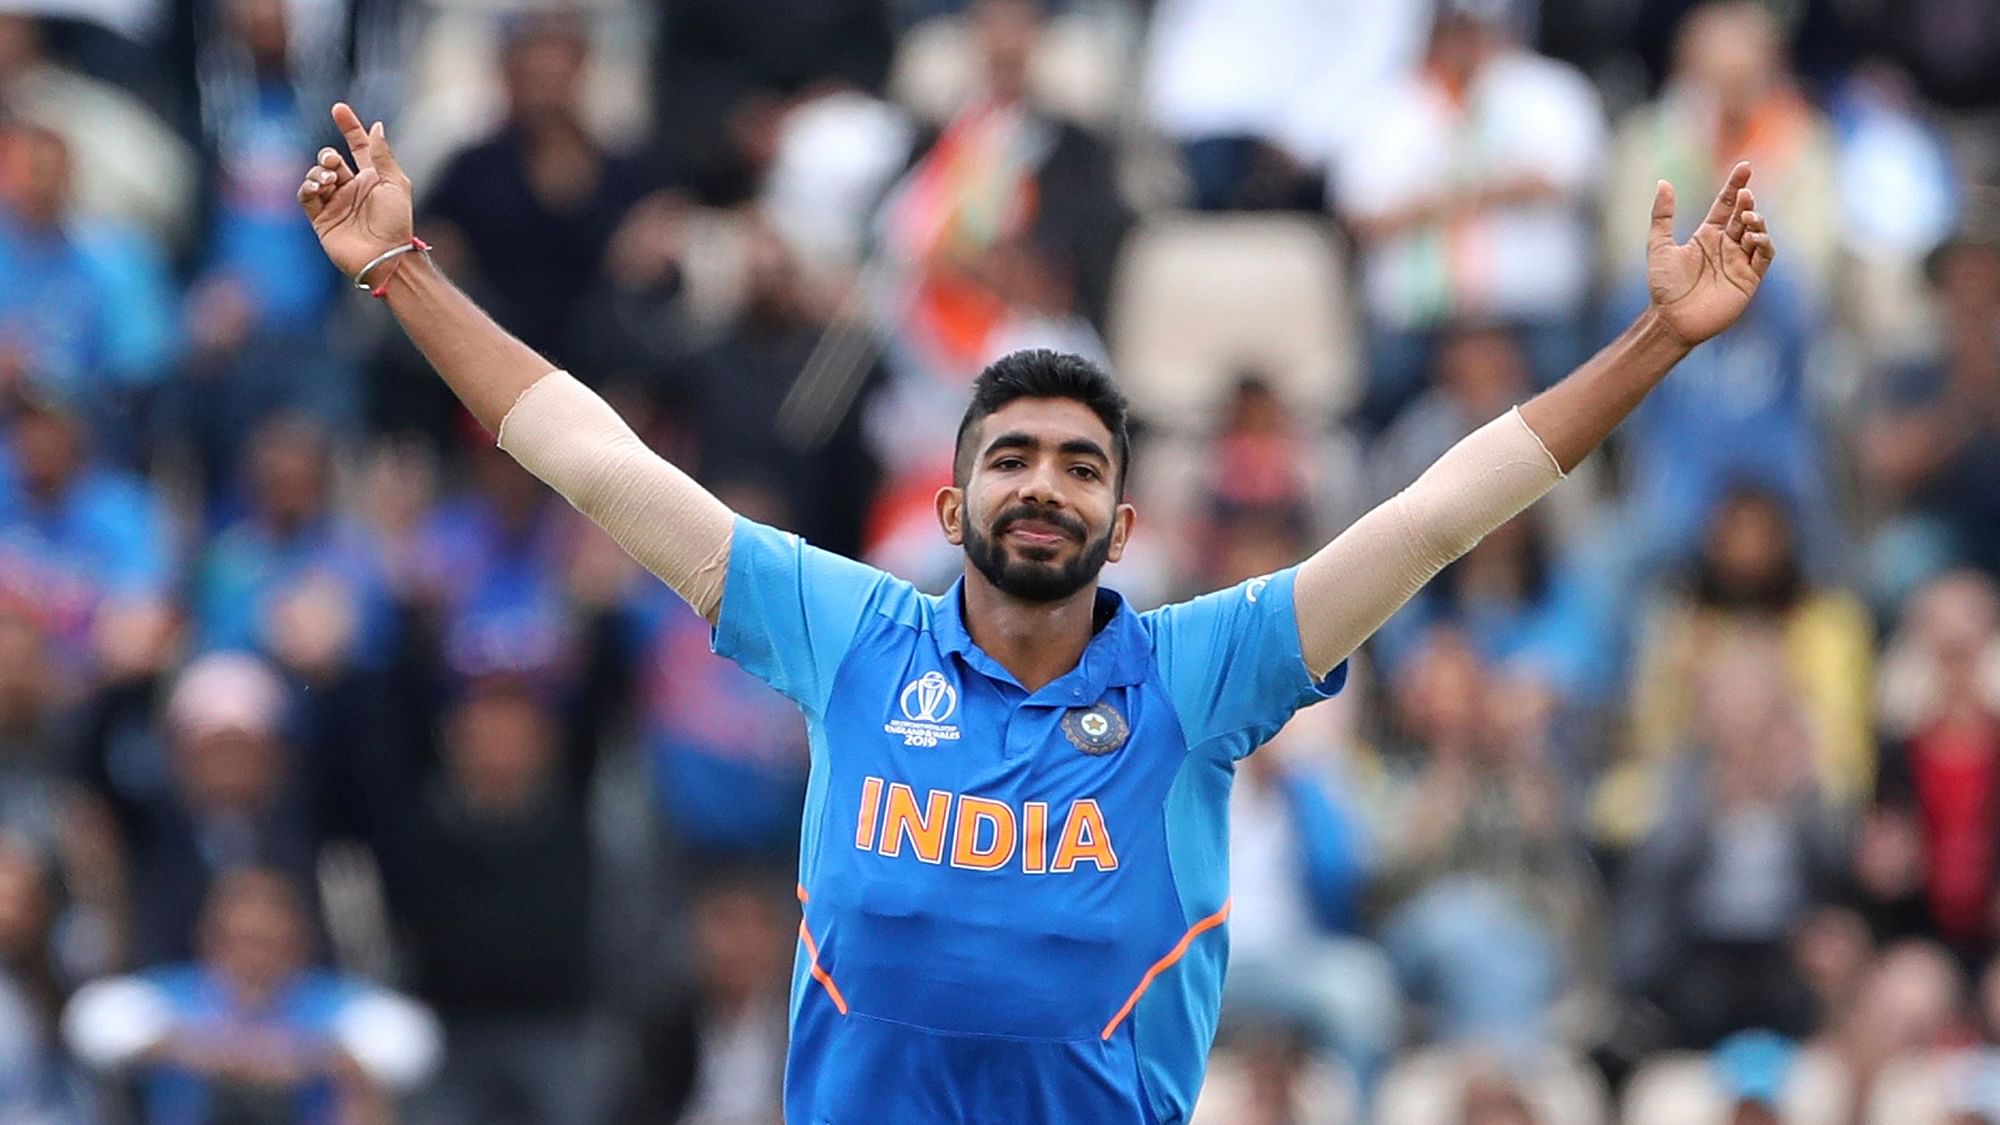 Jasprit Bumrah was the pick of the India’s bowlers in the match agains South Africa.